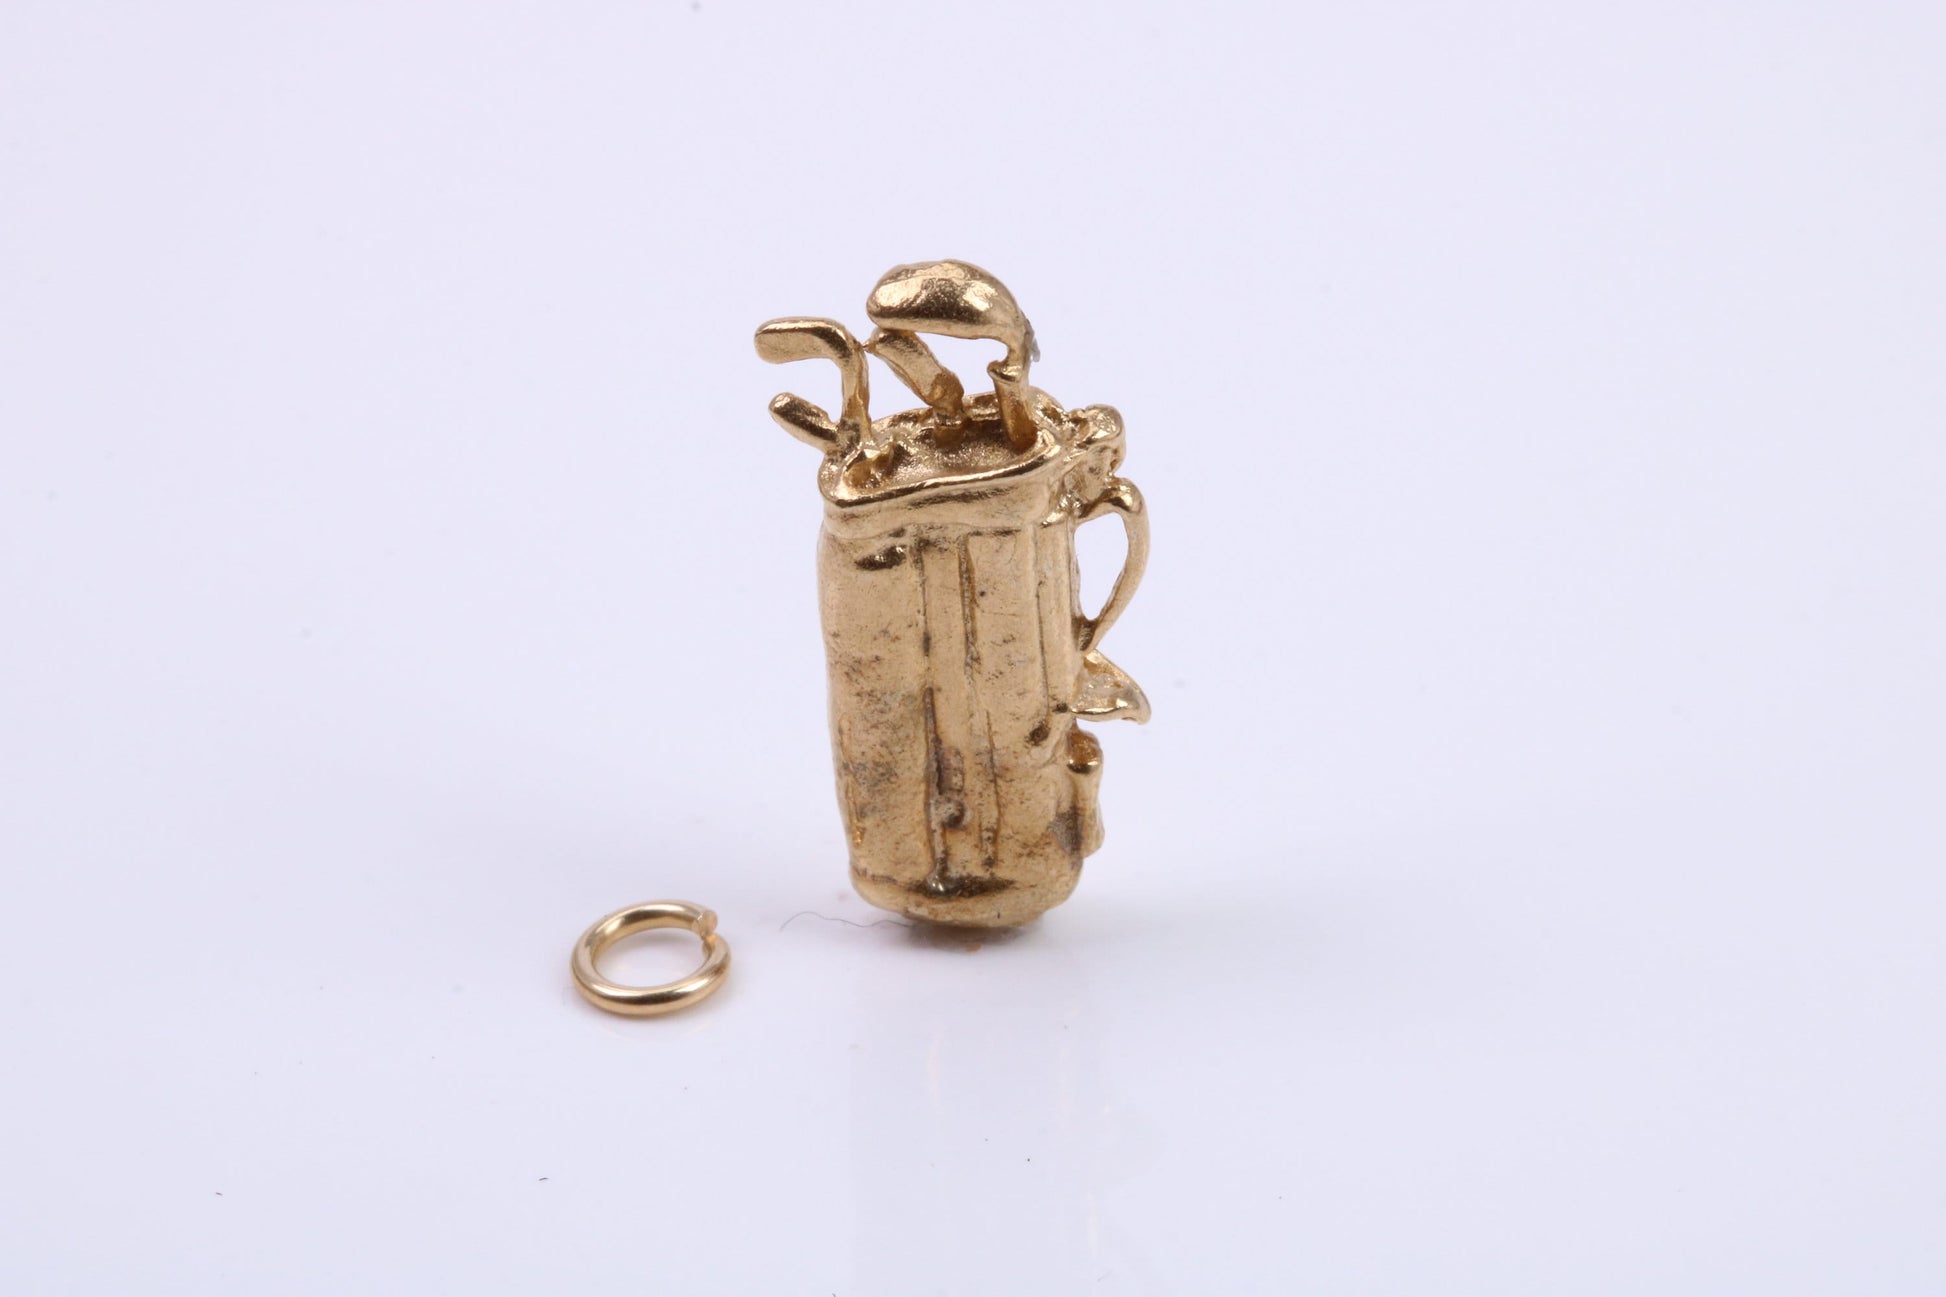 Golf Bag Charm, Traditional Charm, Made from Solid 9ct Yellow Gold, British Hallmarked, Complete with Attachment Link